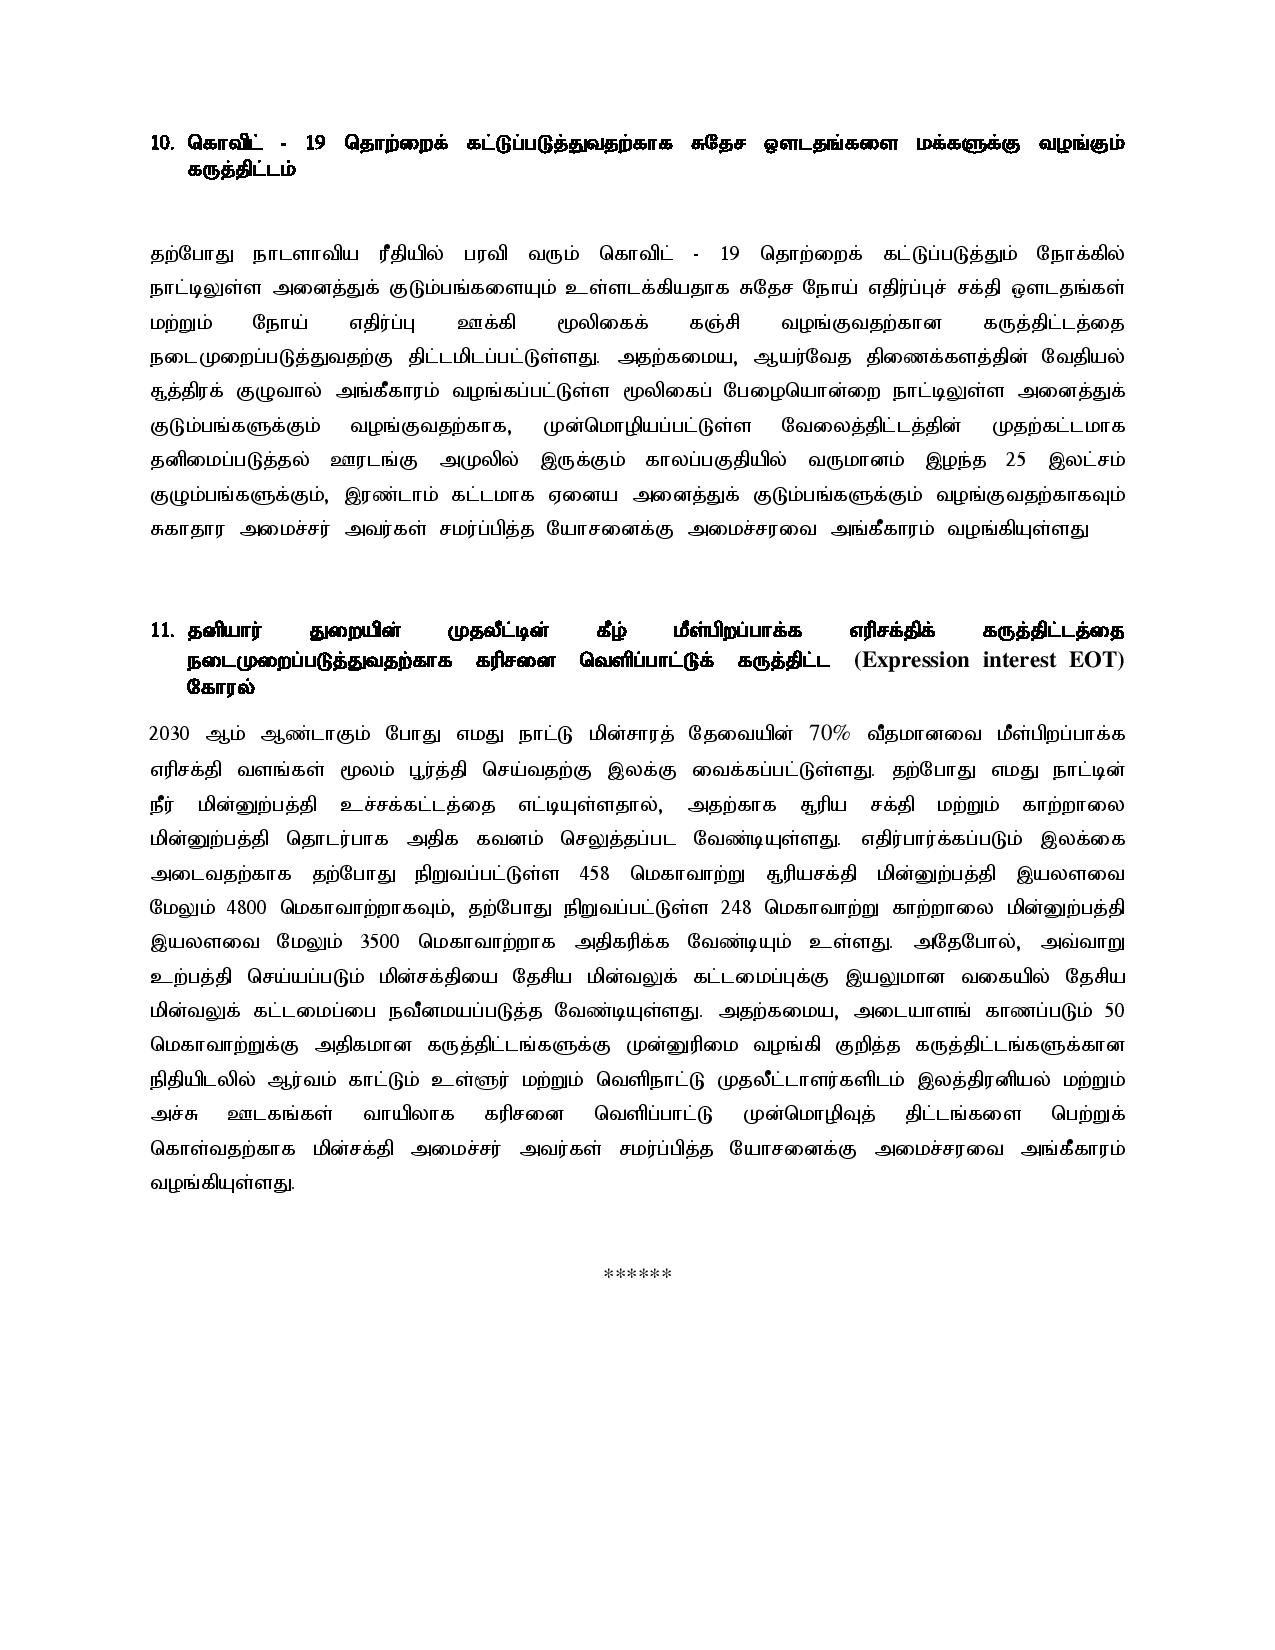 Cabinet Decision on 2021.08.30Tamil page 005